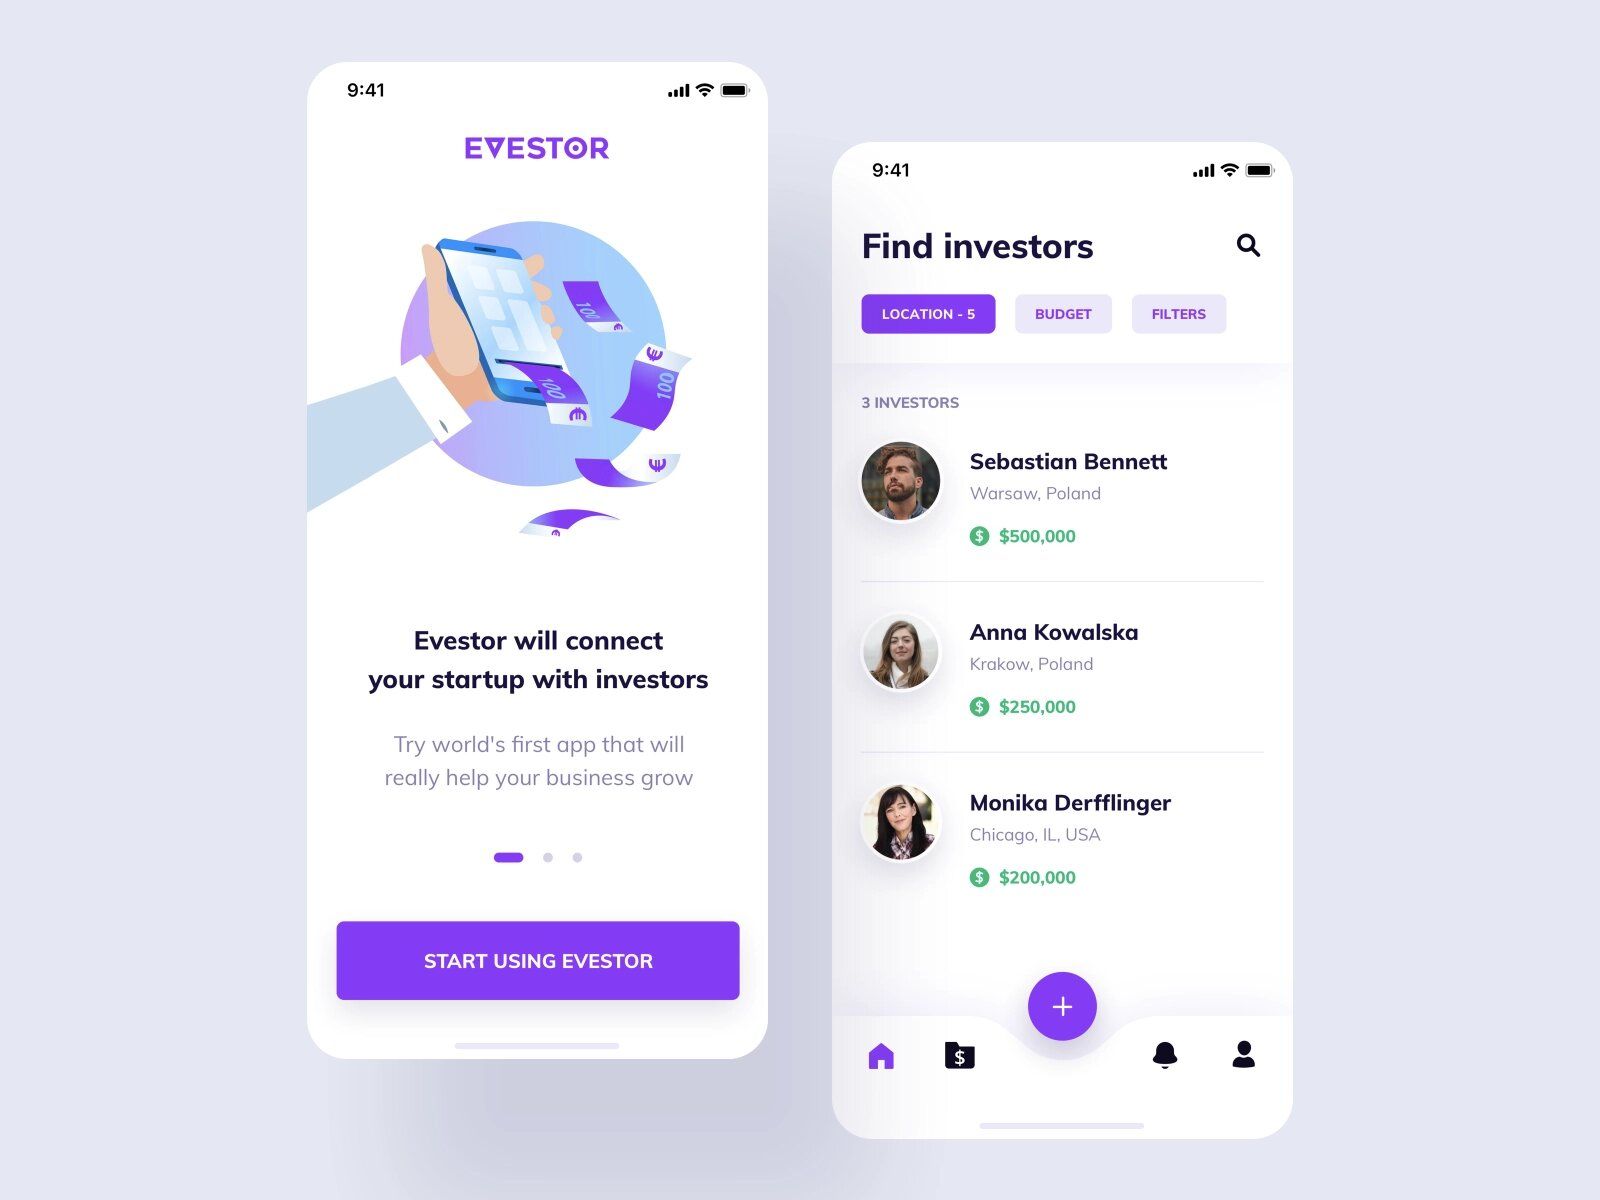 At the first round, you may not understand how to present your business positively and raise capital from new investors (*image by [Kamil Halada](https://dribbble.com/kamilhalada){ rel="nofollow" target="_blank" .default-md}*)